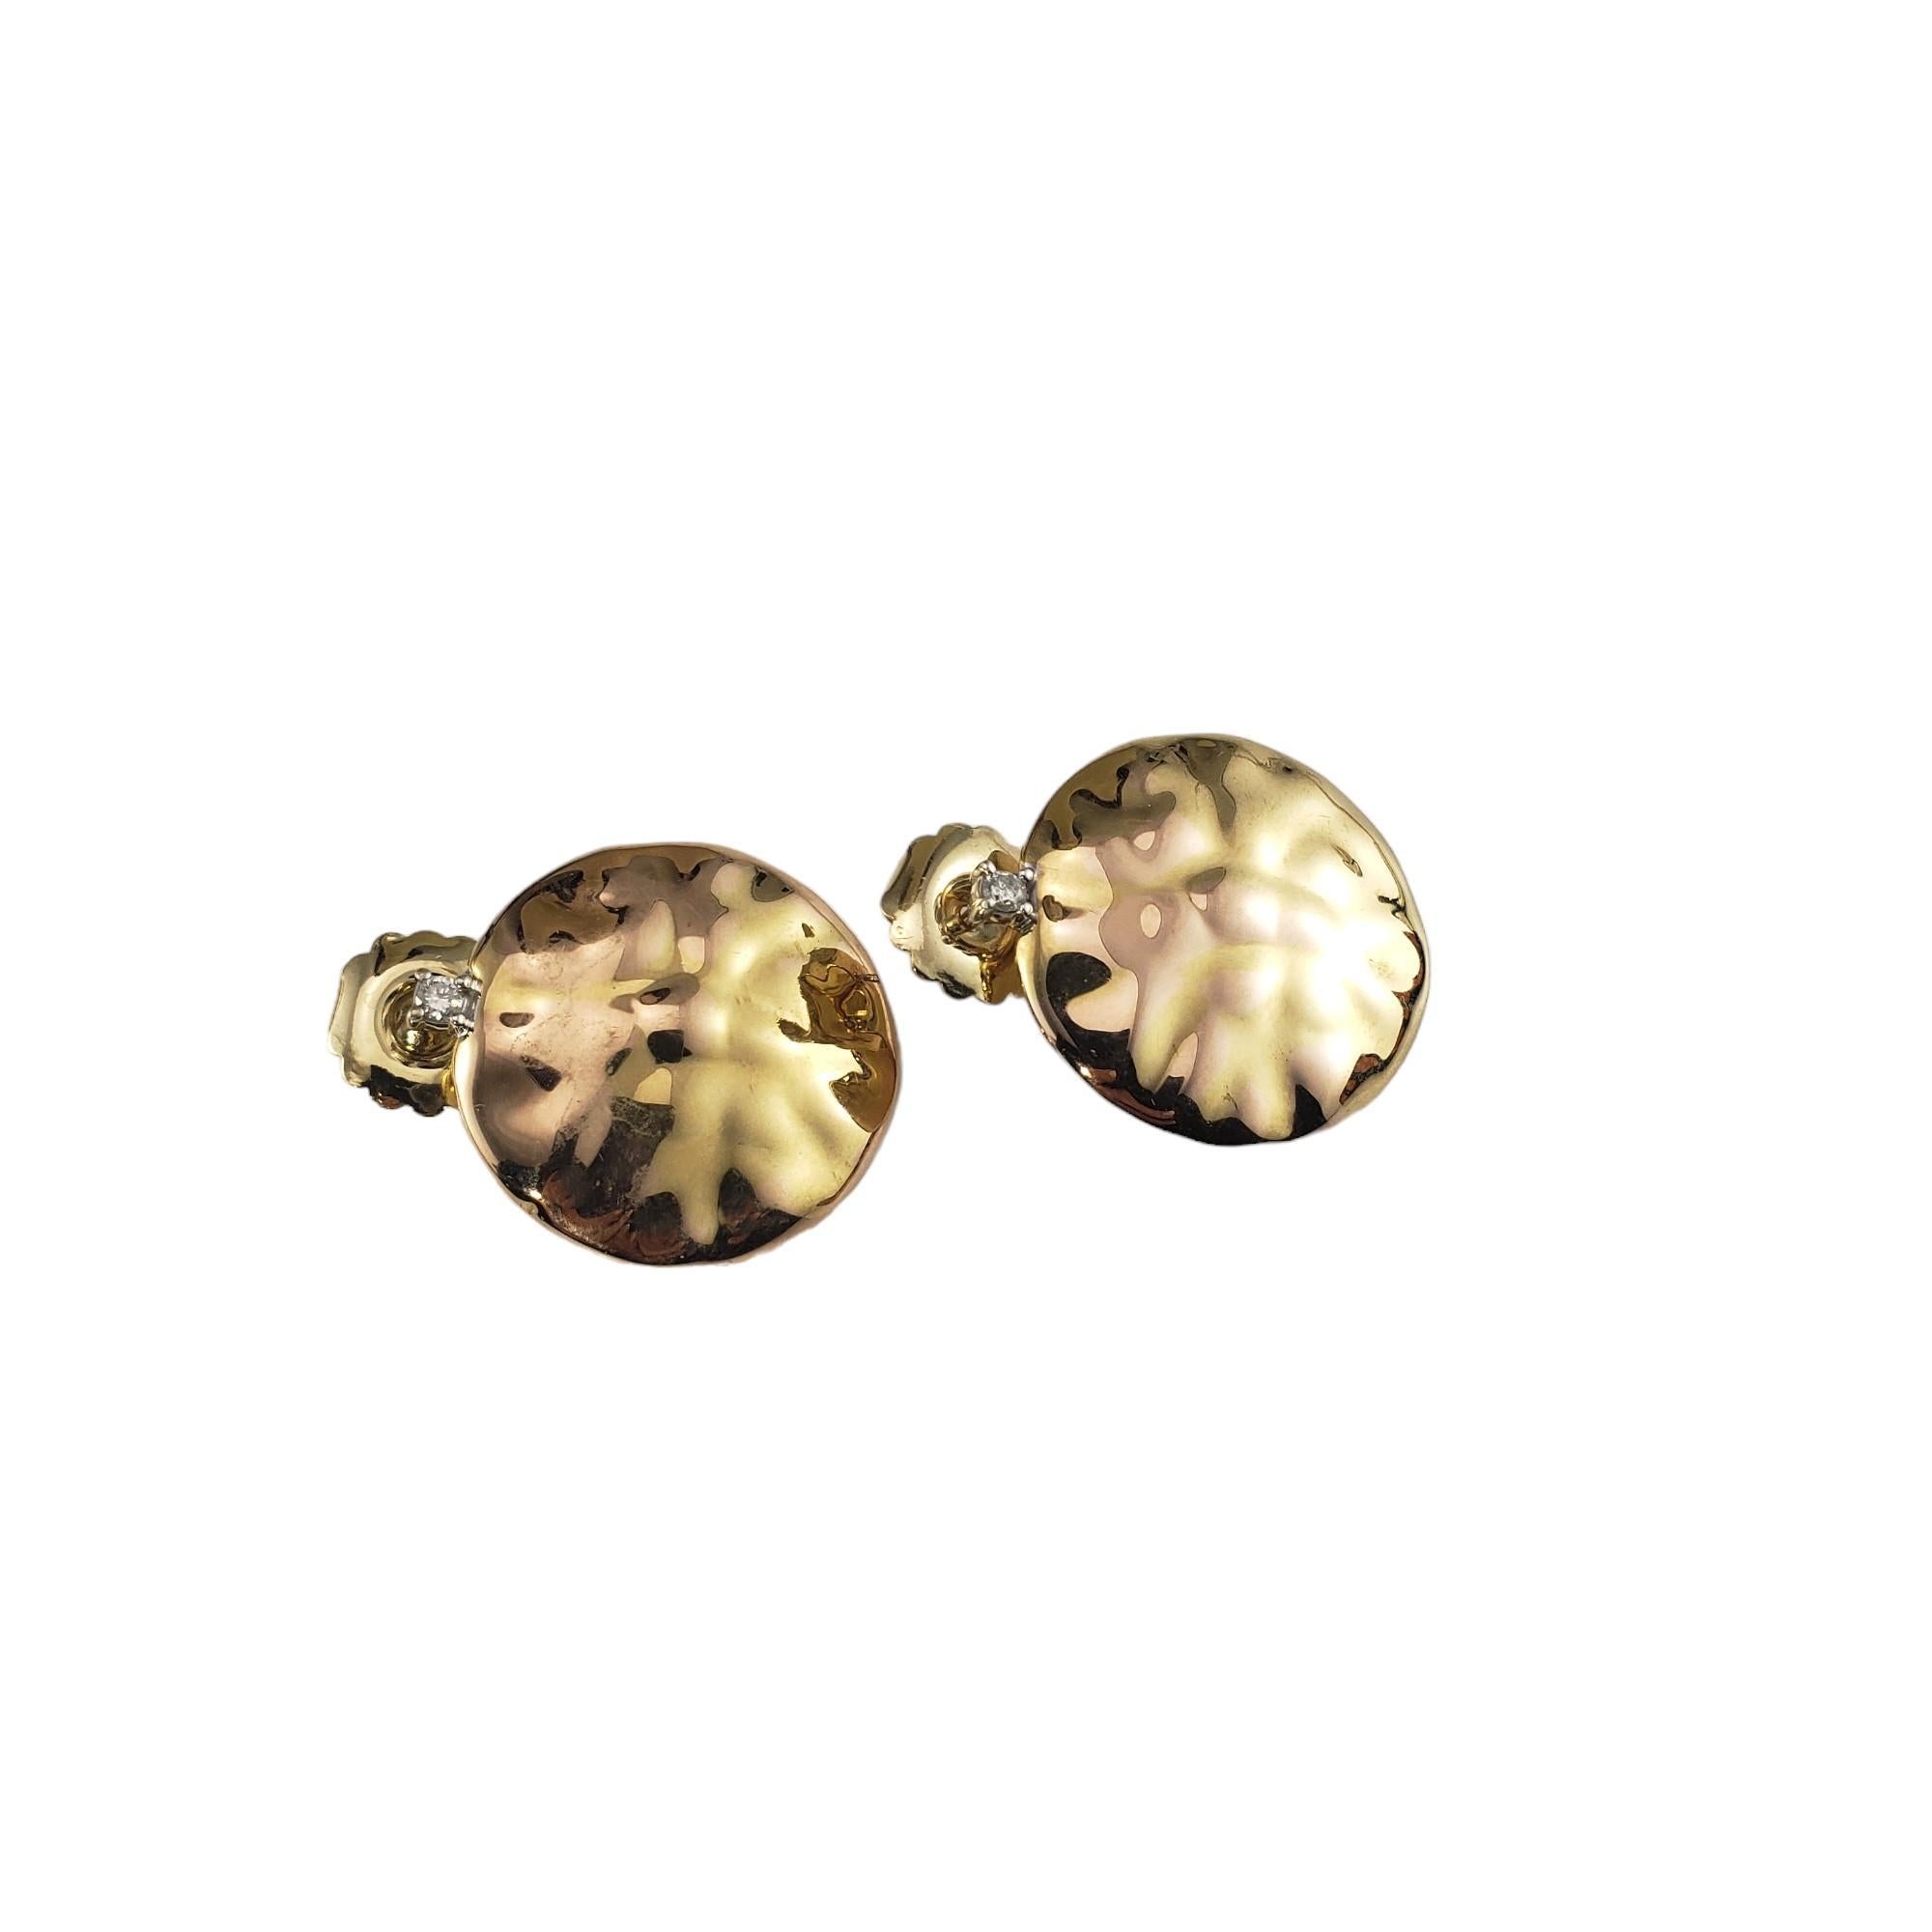 Round Cut 14 Karat Hammered Yellow Gold and Diamond Earrings #16370 For Sale